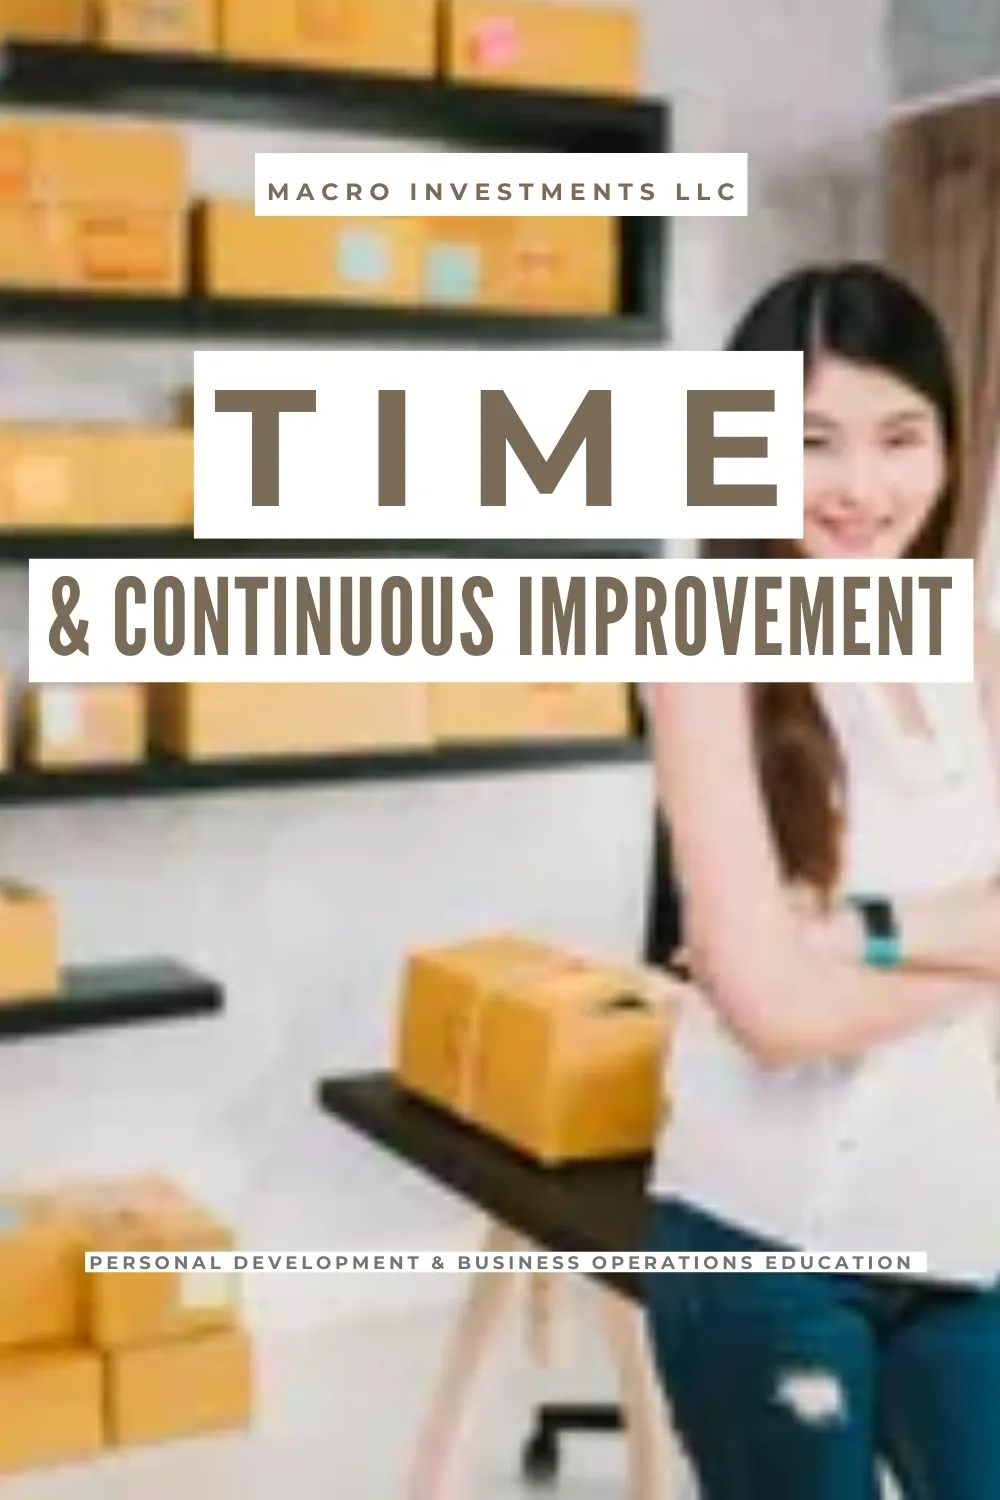 How to Make the Most of Your Time With Continuous Improvement | Blog | InvestingTE.com